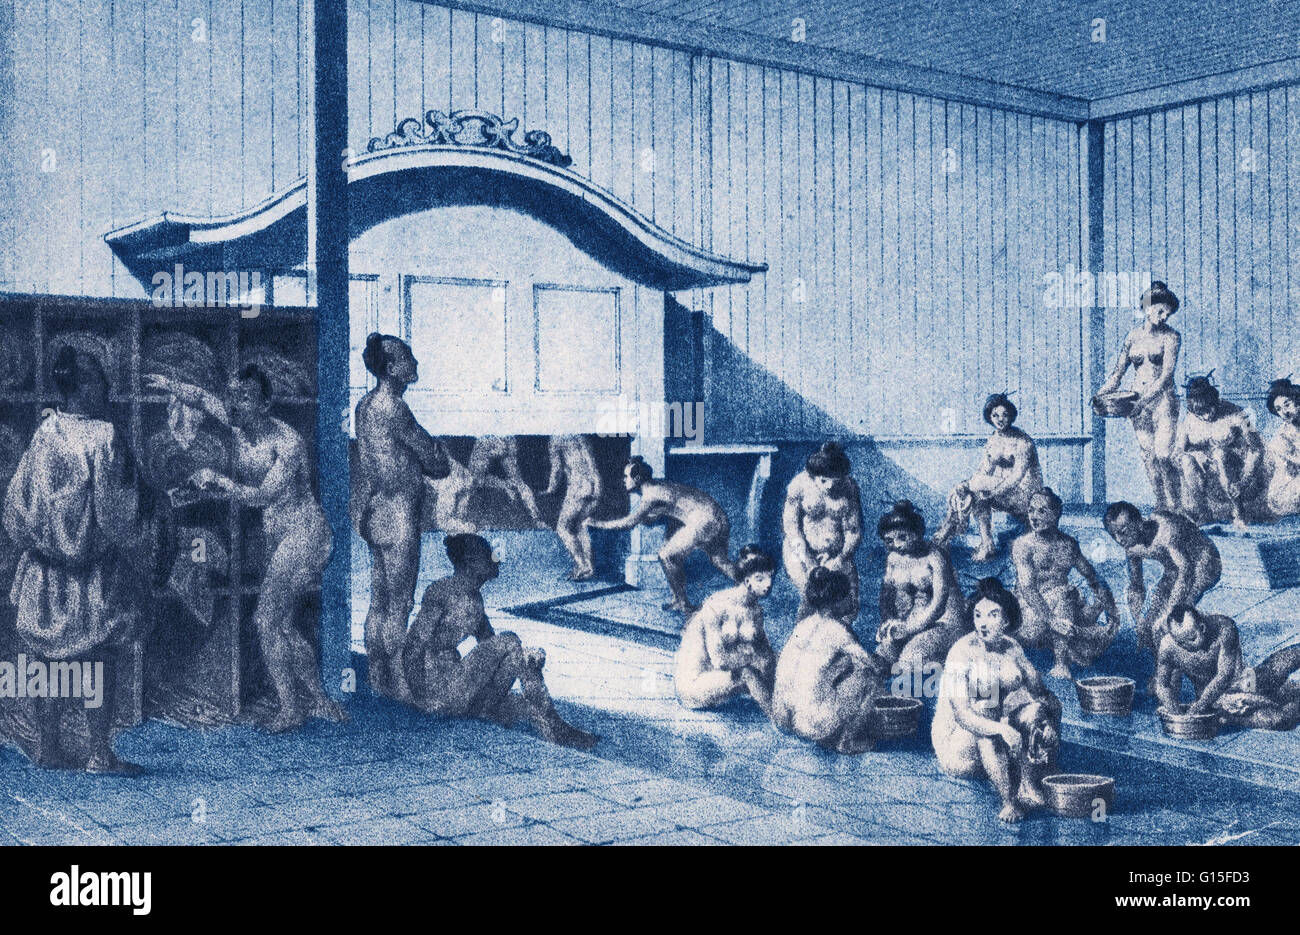 Two accredited artists accompanied Perry to Japan and their sketches were published in his official report to Congress. This one shows Japanese men and women bathing together, caused a Congressional furor and was later suppressed. According to Perry, the Stock Photo